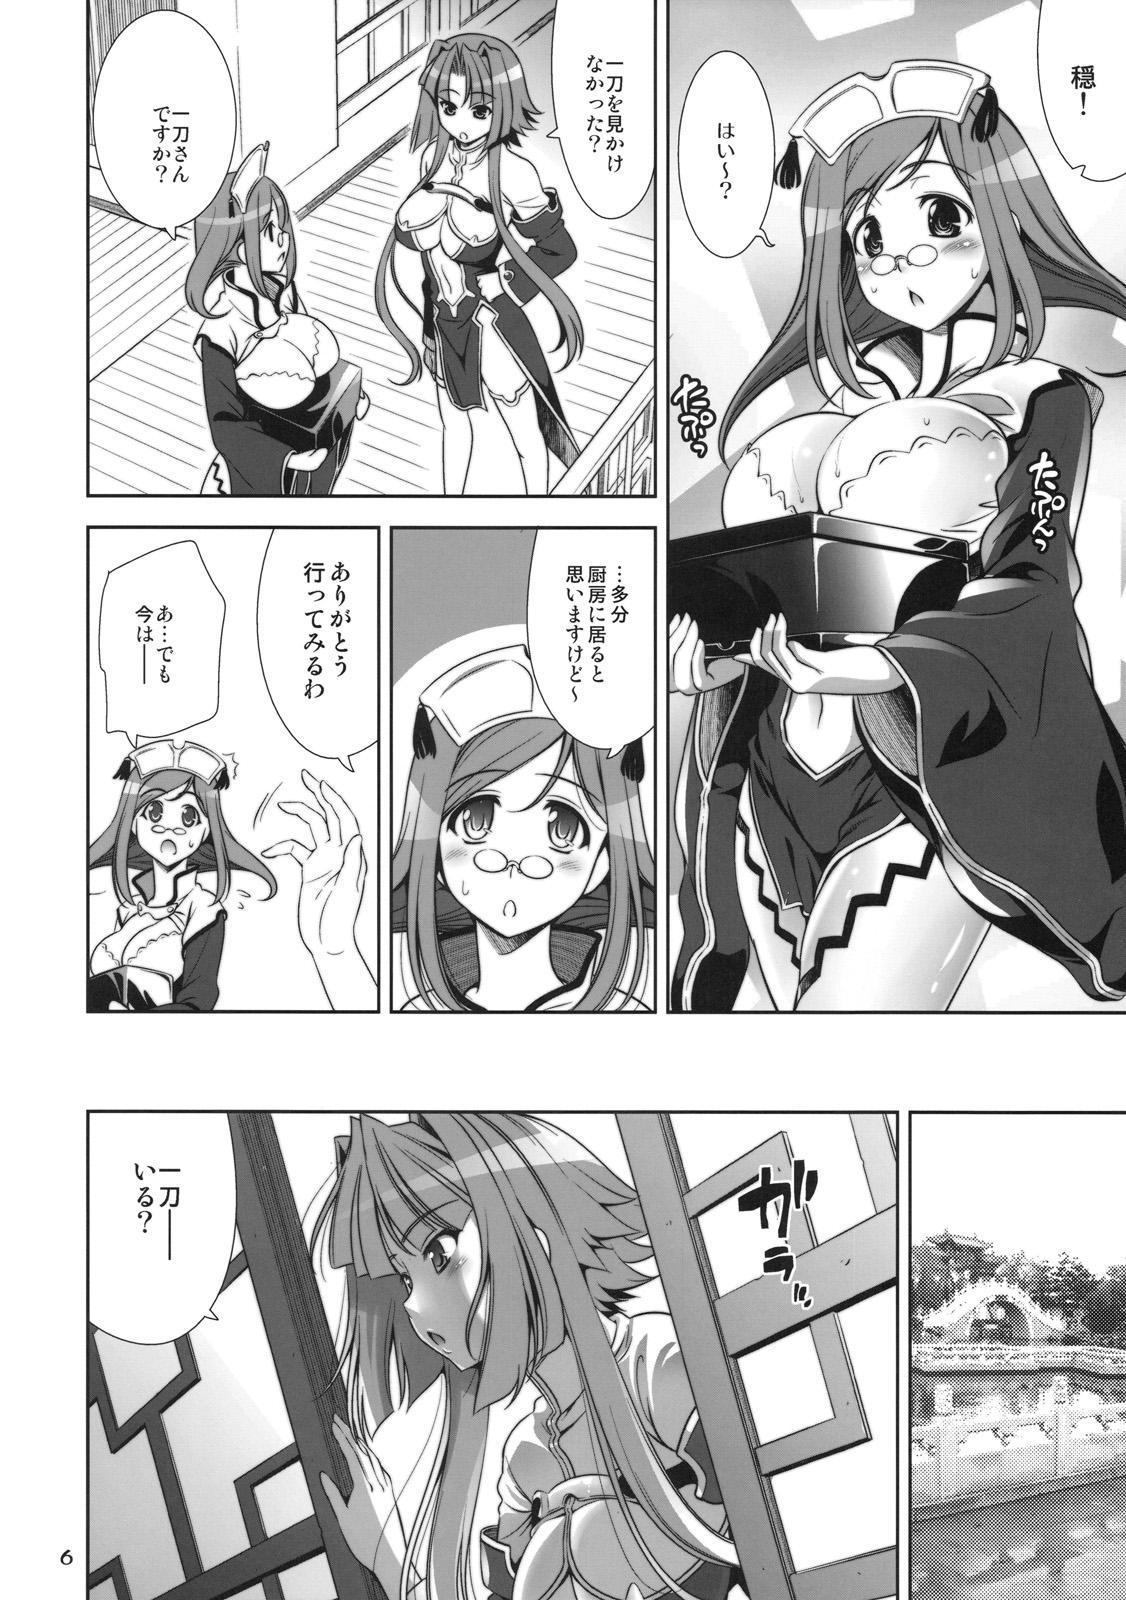 Prostitute Go! My Way - Koihime musou Free Amateur - Page 5